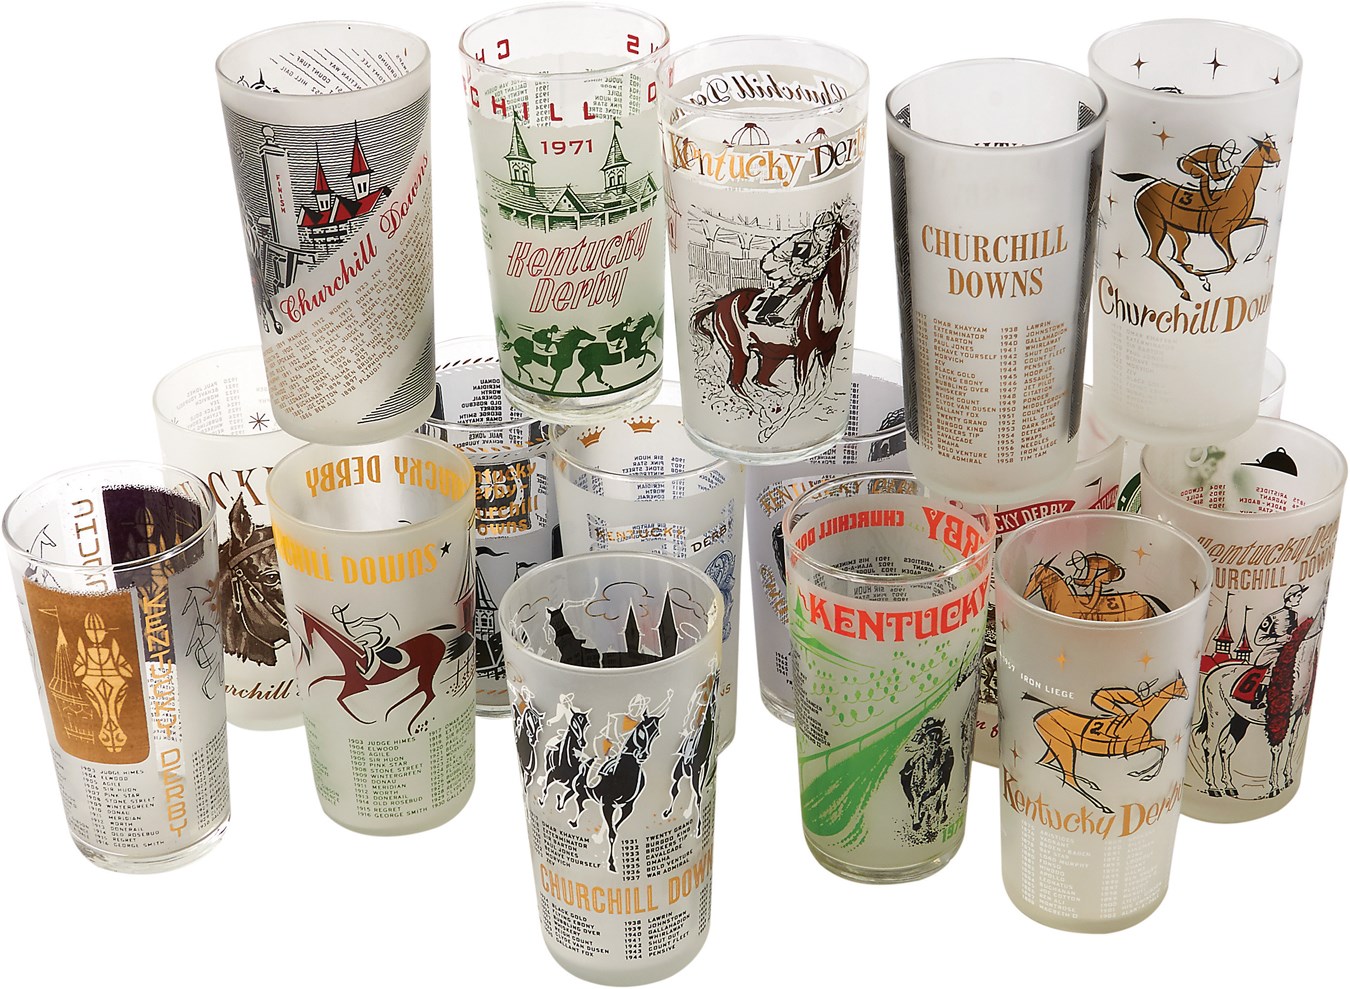 - 1945-2016 Complete Run of Kentucky Derby Glasses (74) (Excluding only the 1947 blank partially frosted glass)